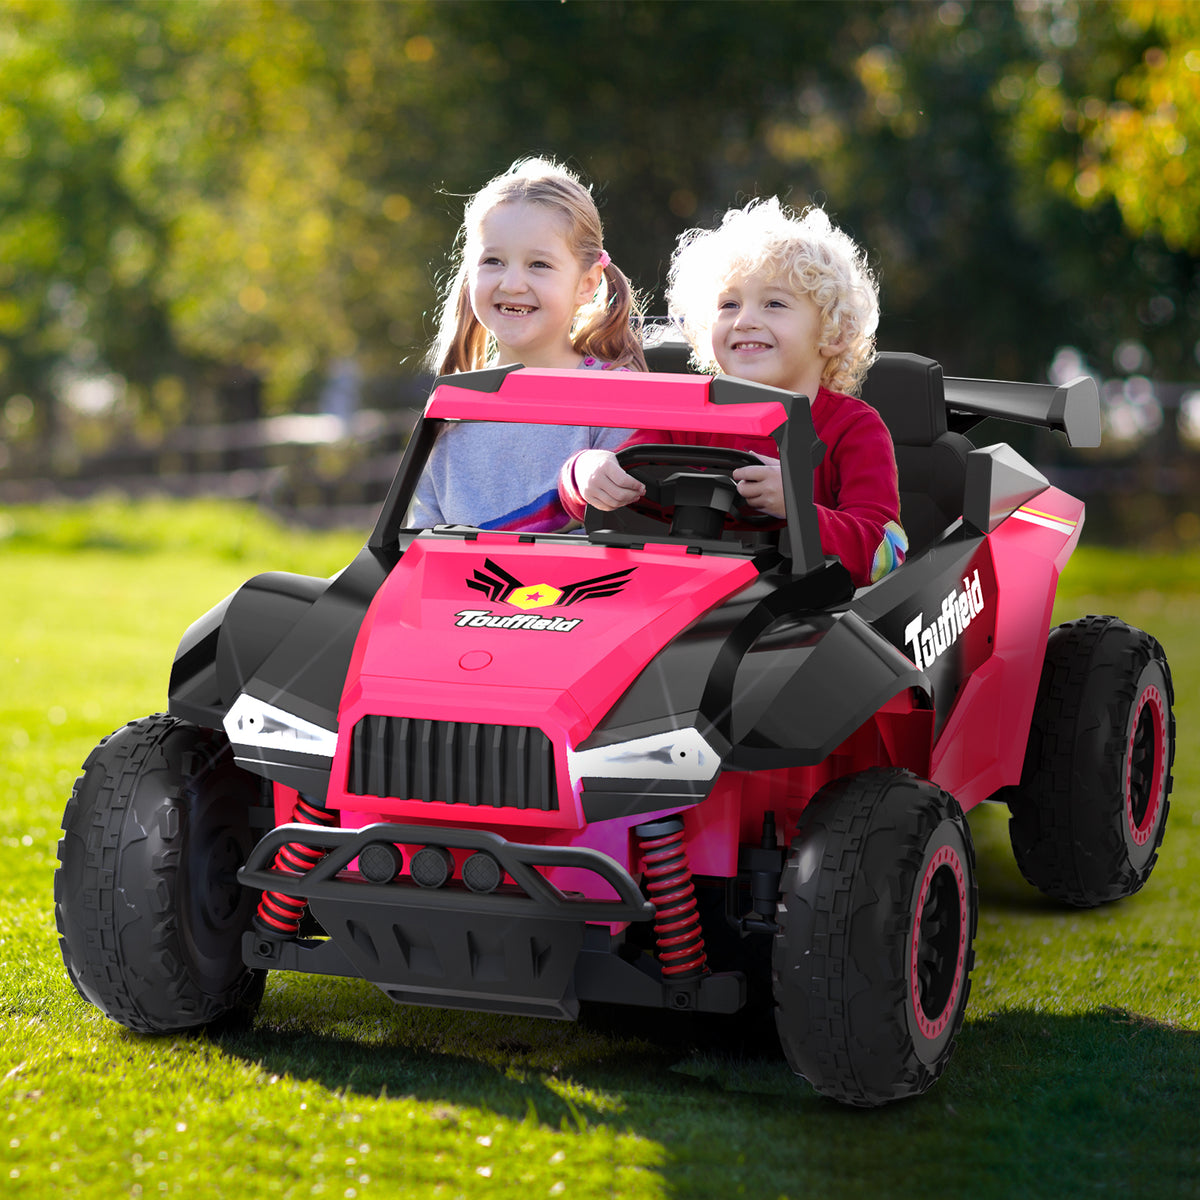 XJD 12V/24V 7AH Ride On Car with Remote Control, 2WD/4WD Switchable, 2 Seats, Power Car for Kids, Black&Pink